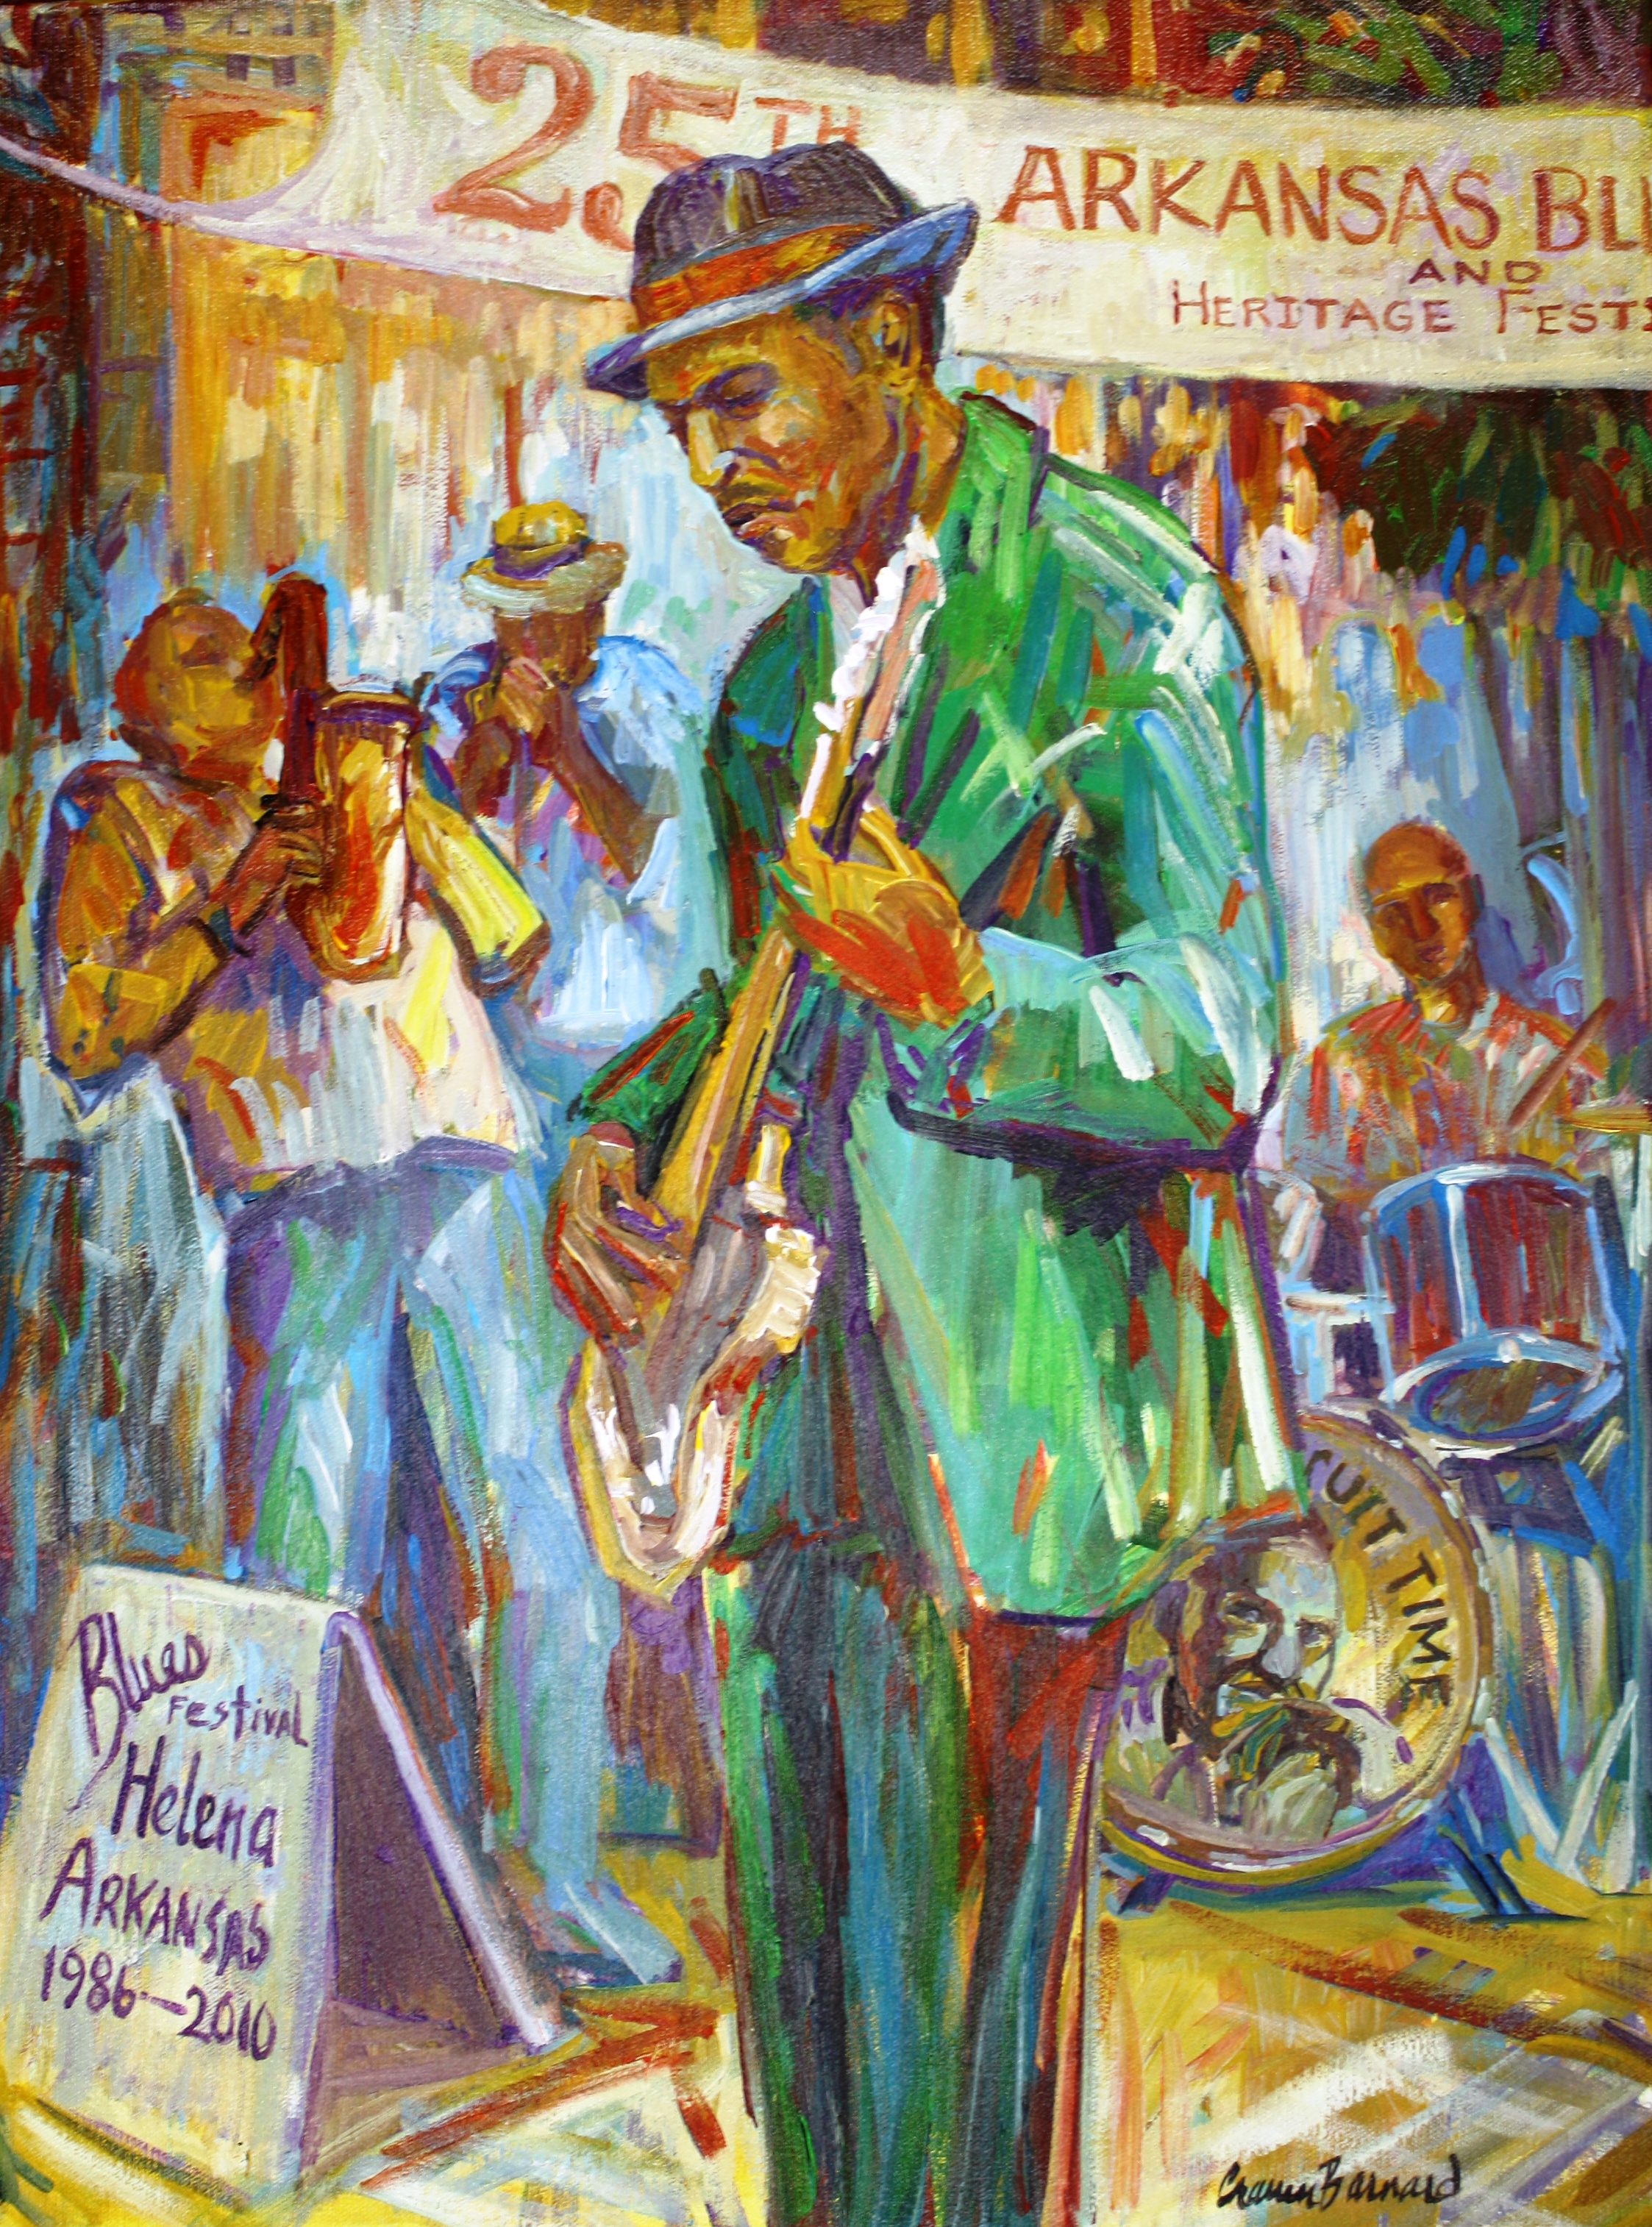 painting of man playing guitar on street